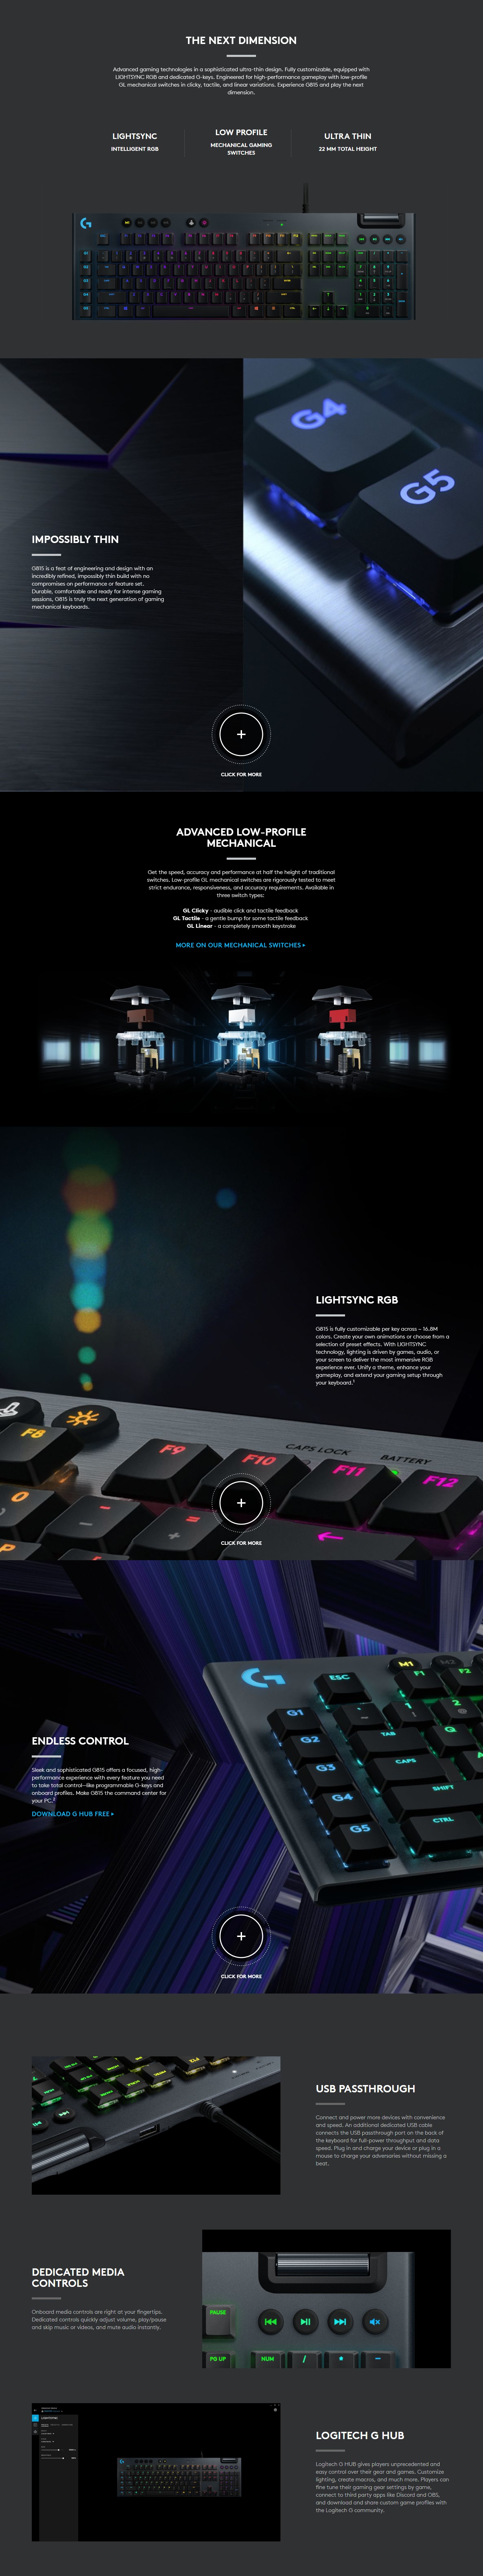 A large marketing image providing additional information about the product Logitech G815 LIGHTSYNC RGB Mechanical Keyboard - GL Linear - Additional alt info not provided